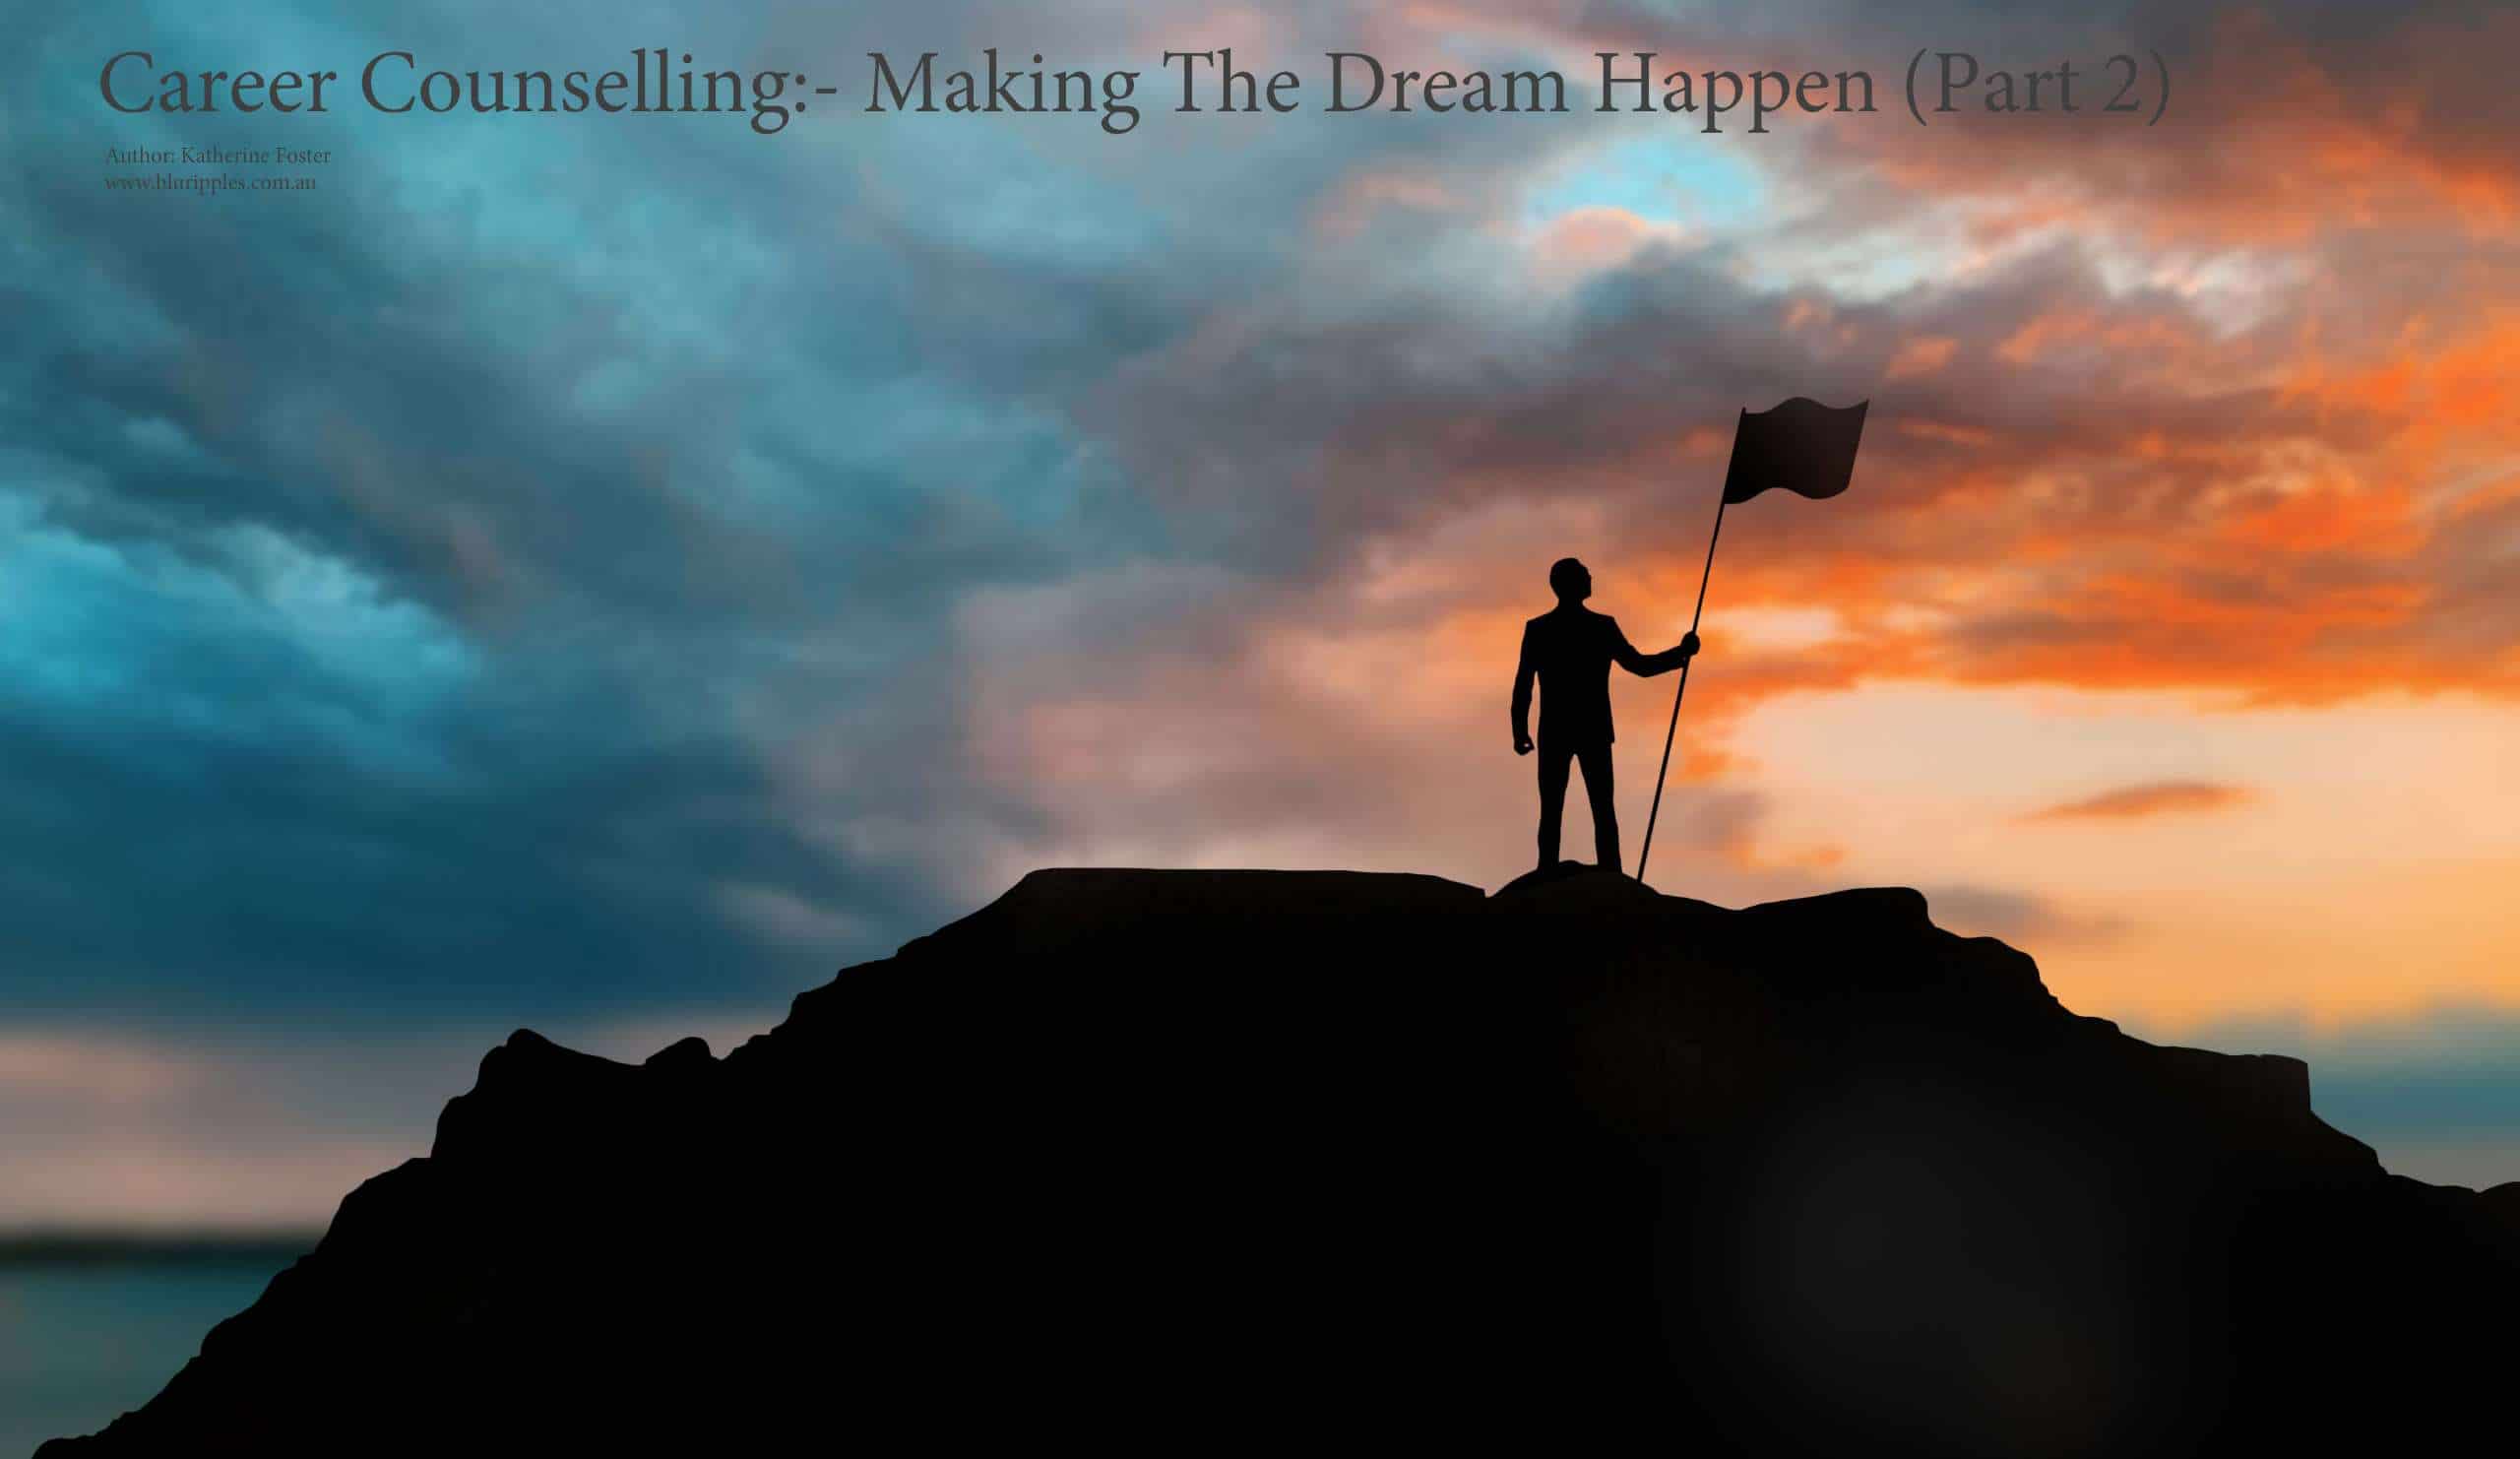 Career Counselling - Making The Dream Happen (Part 2)